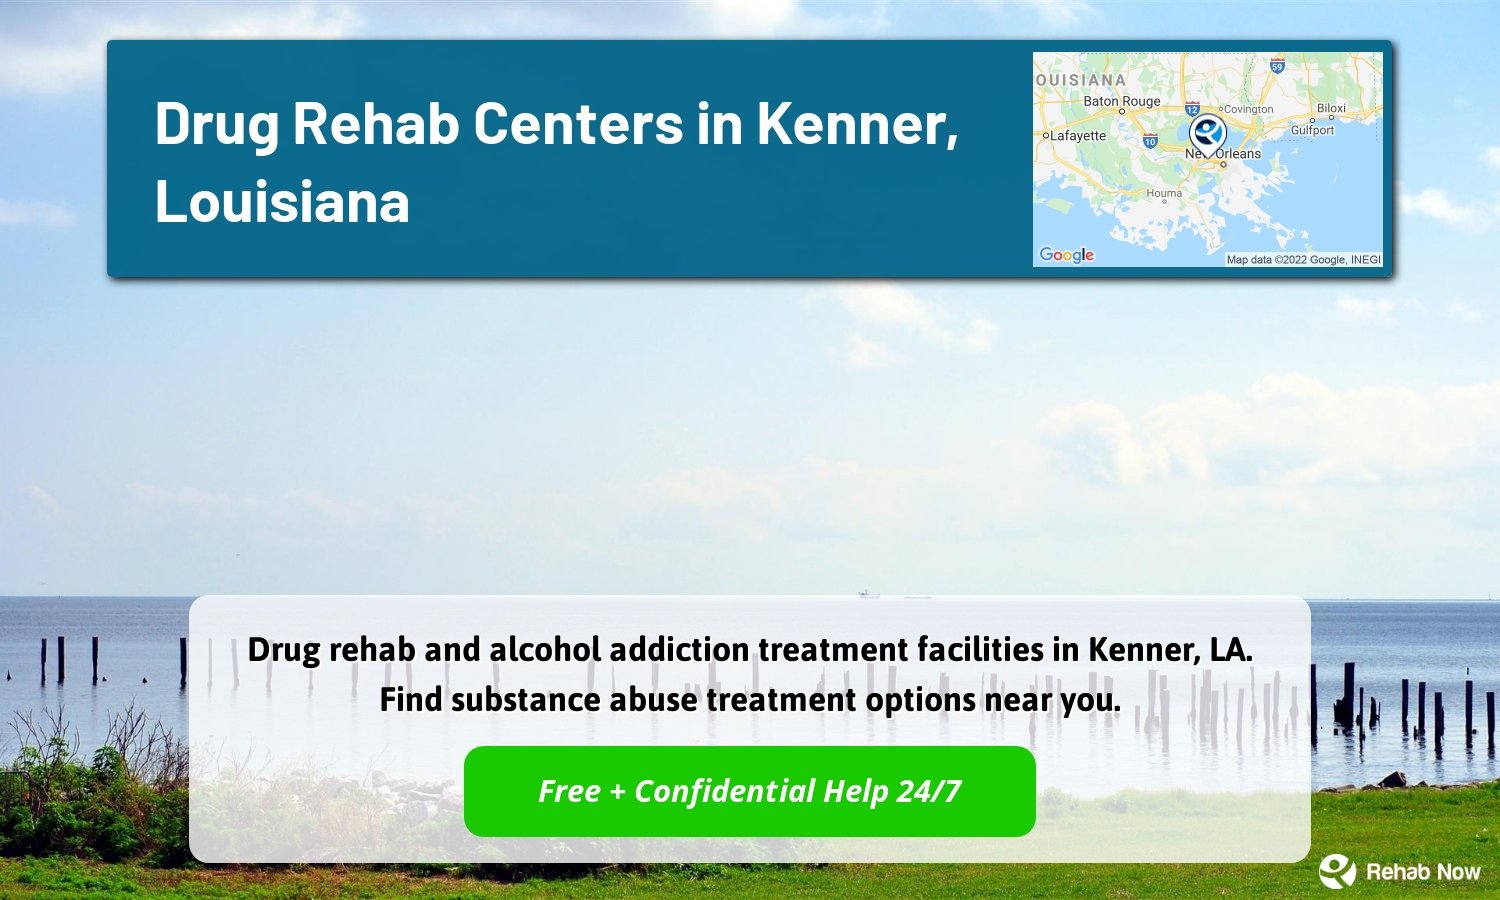 Drug rehab and alcohol addiction treatment facilities in Kenner, LA. Find substance abuse treatment options near you.